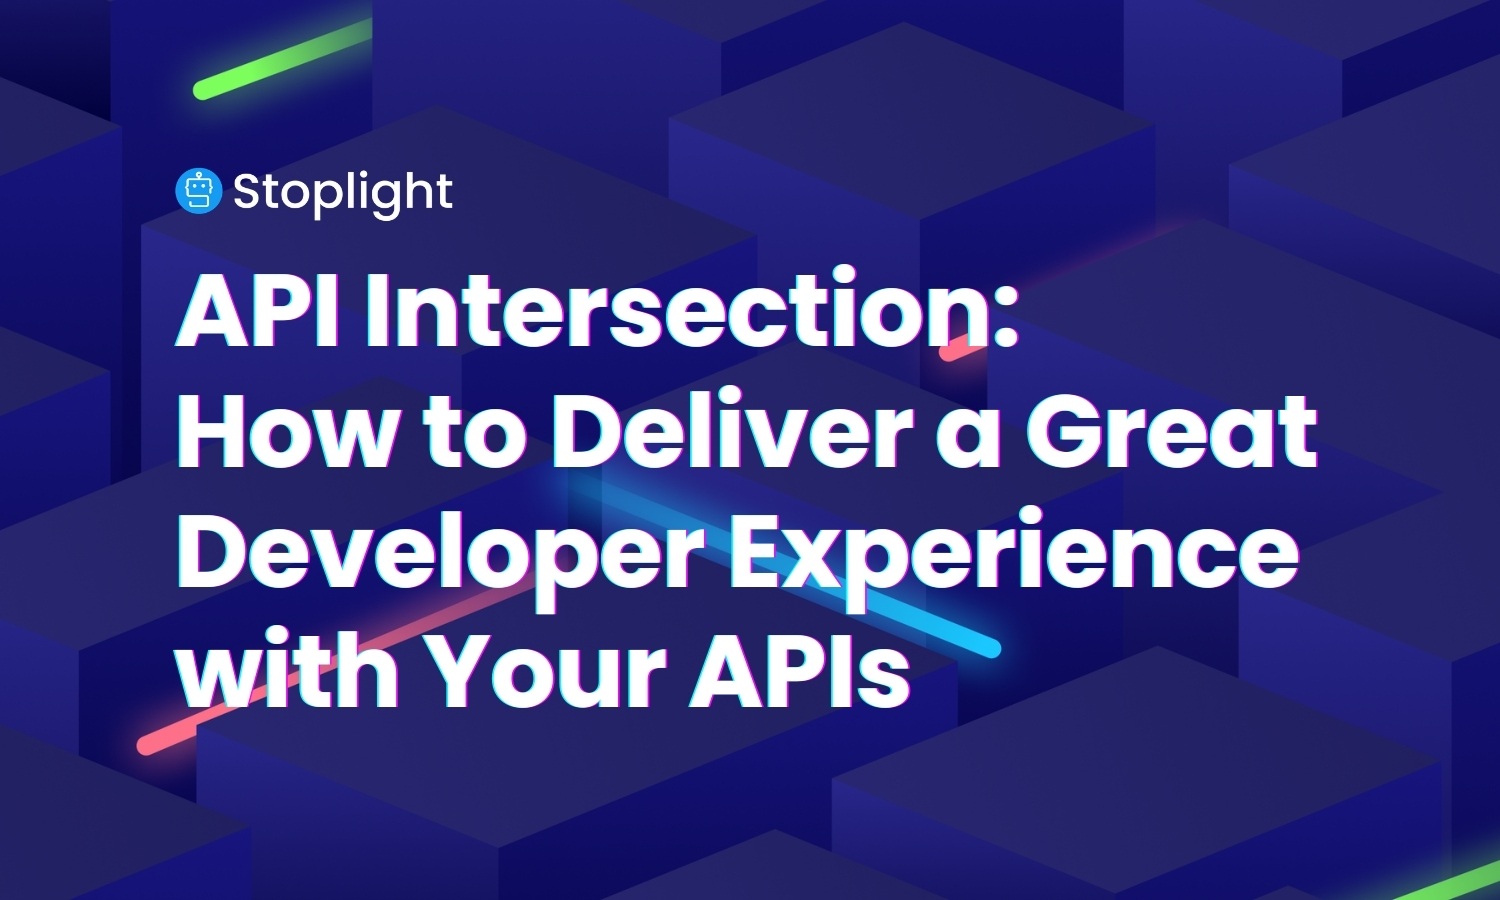 How to Deliver a Great Developer Experience with Your APIs